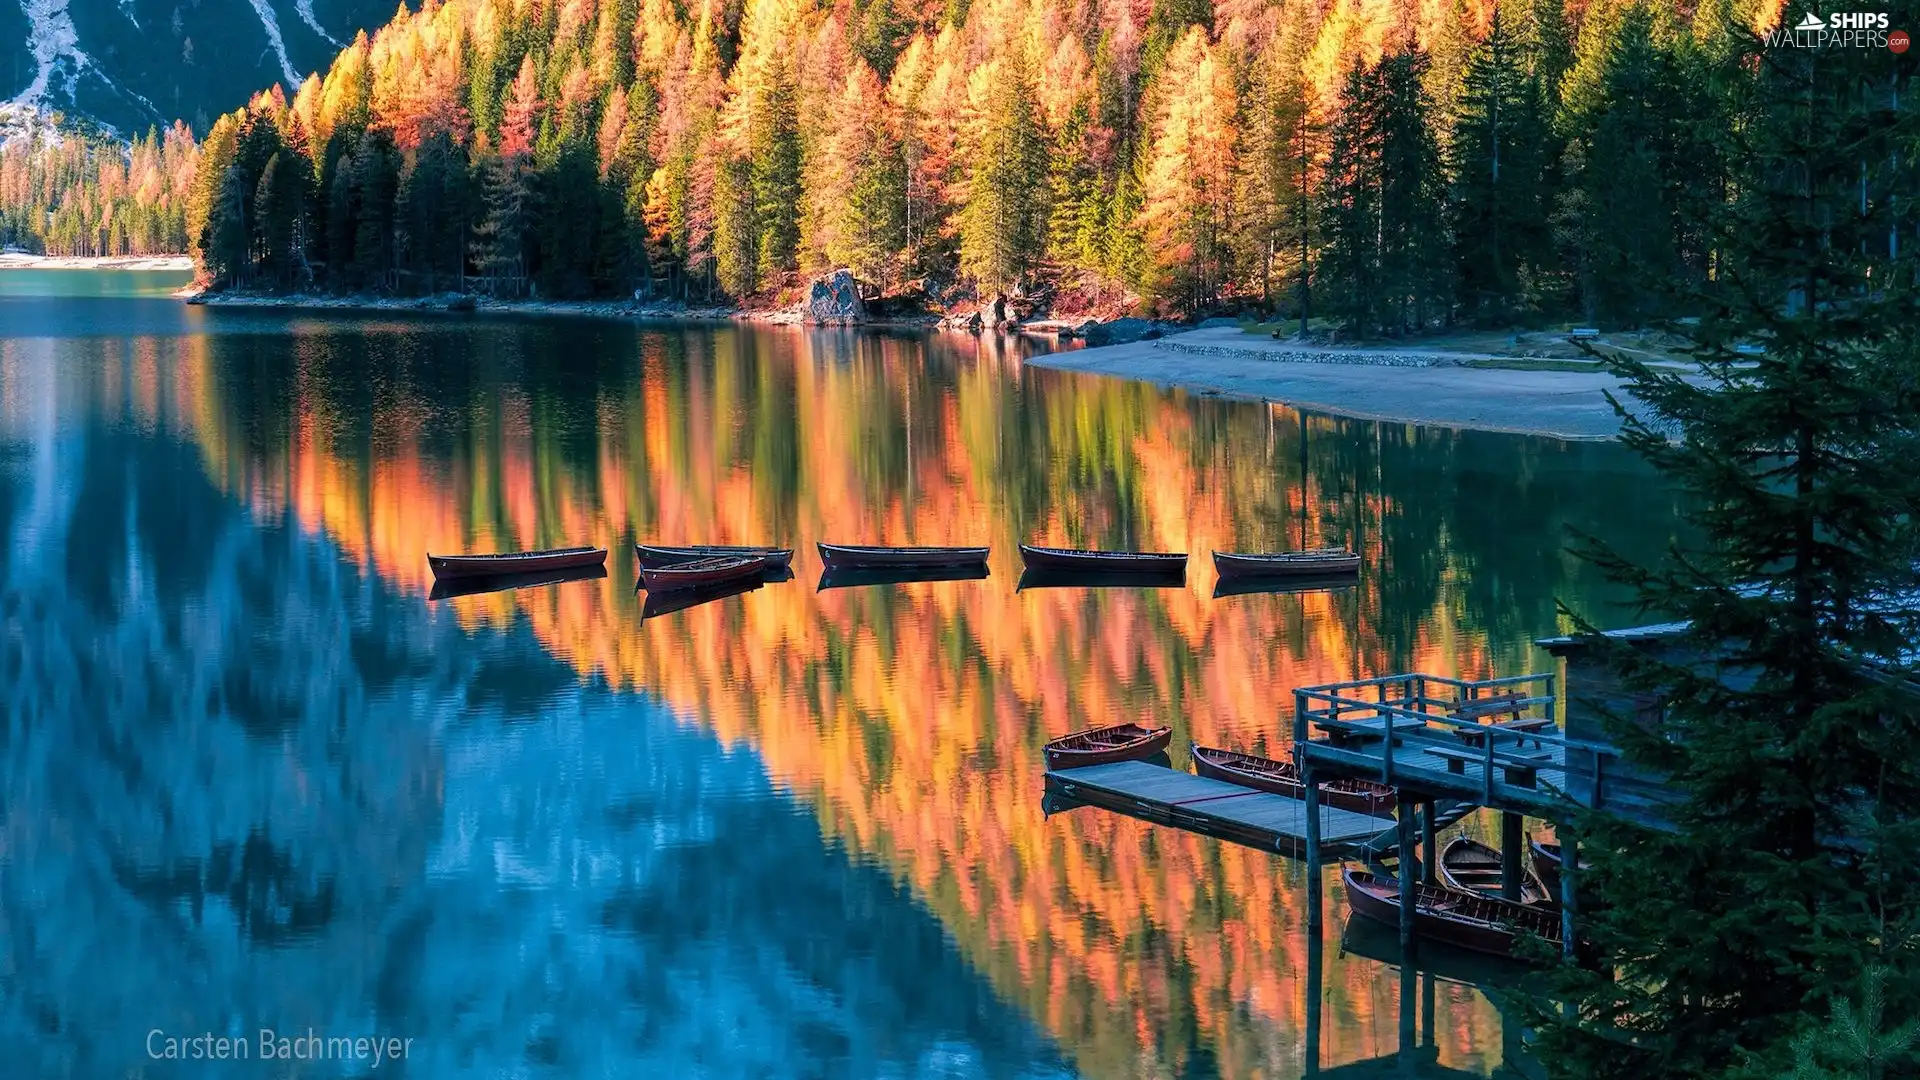 Harbour, boats, trees, viewes, Mountains, Italy, reflection, Pragser Wildsee Lake, forest